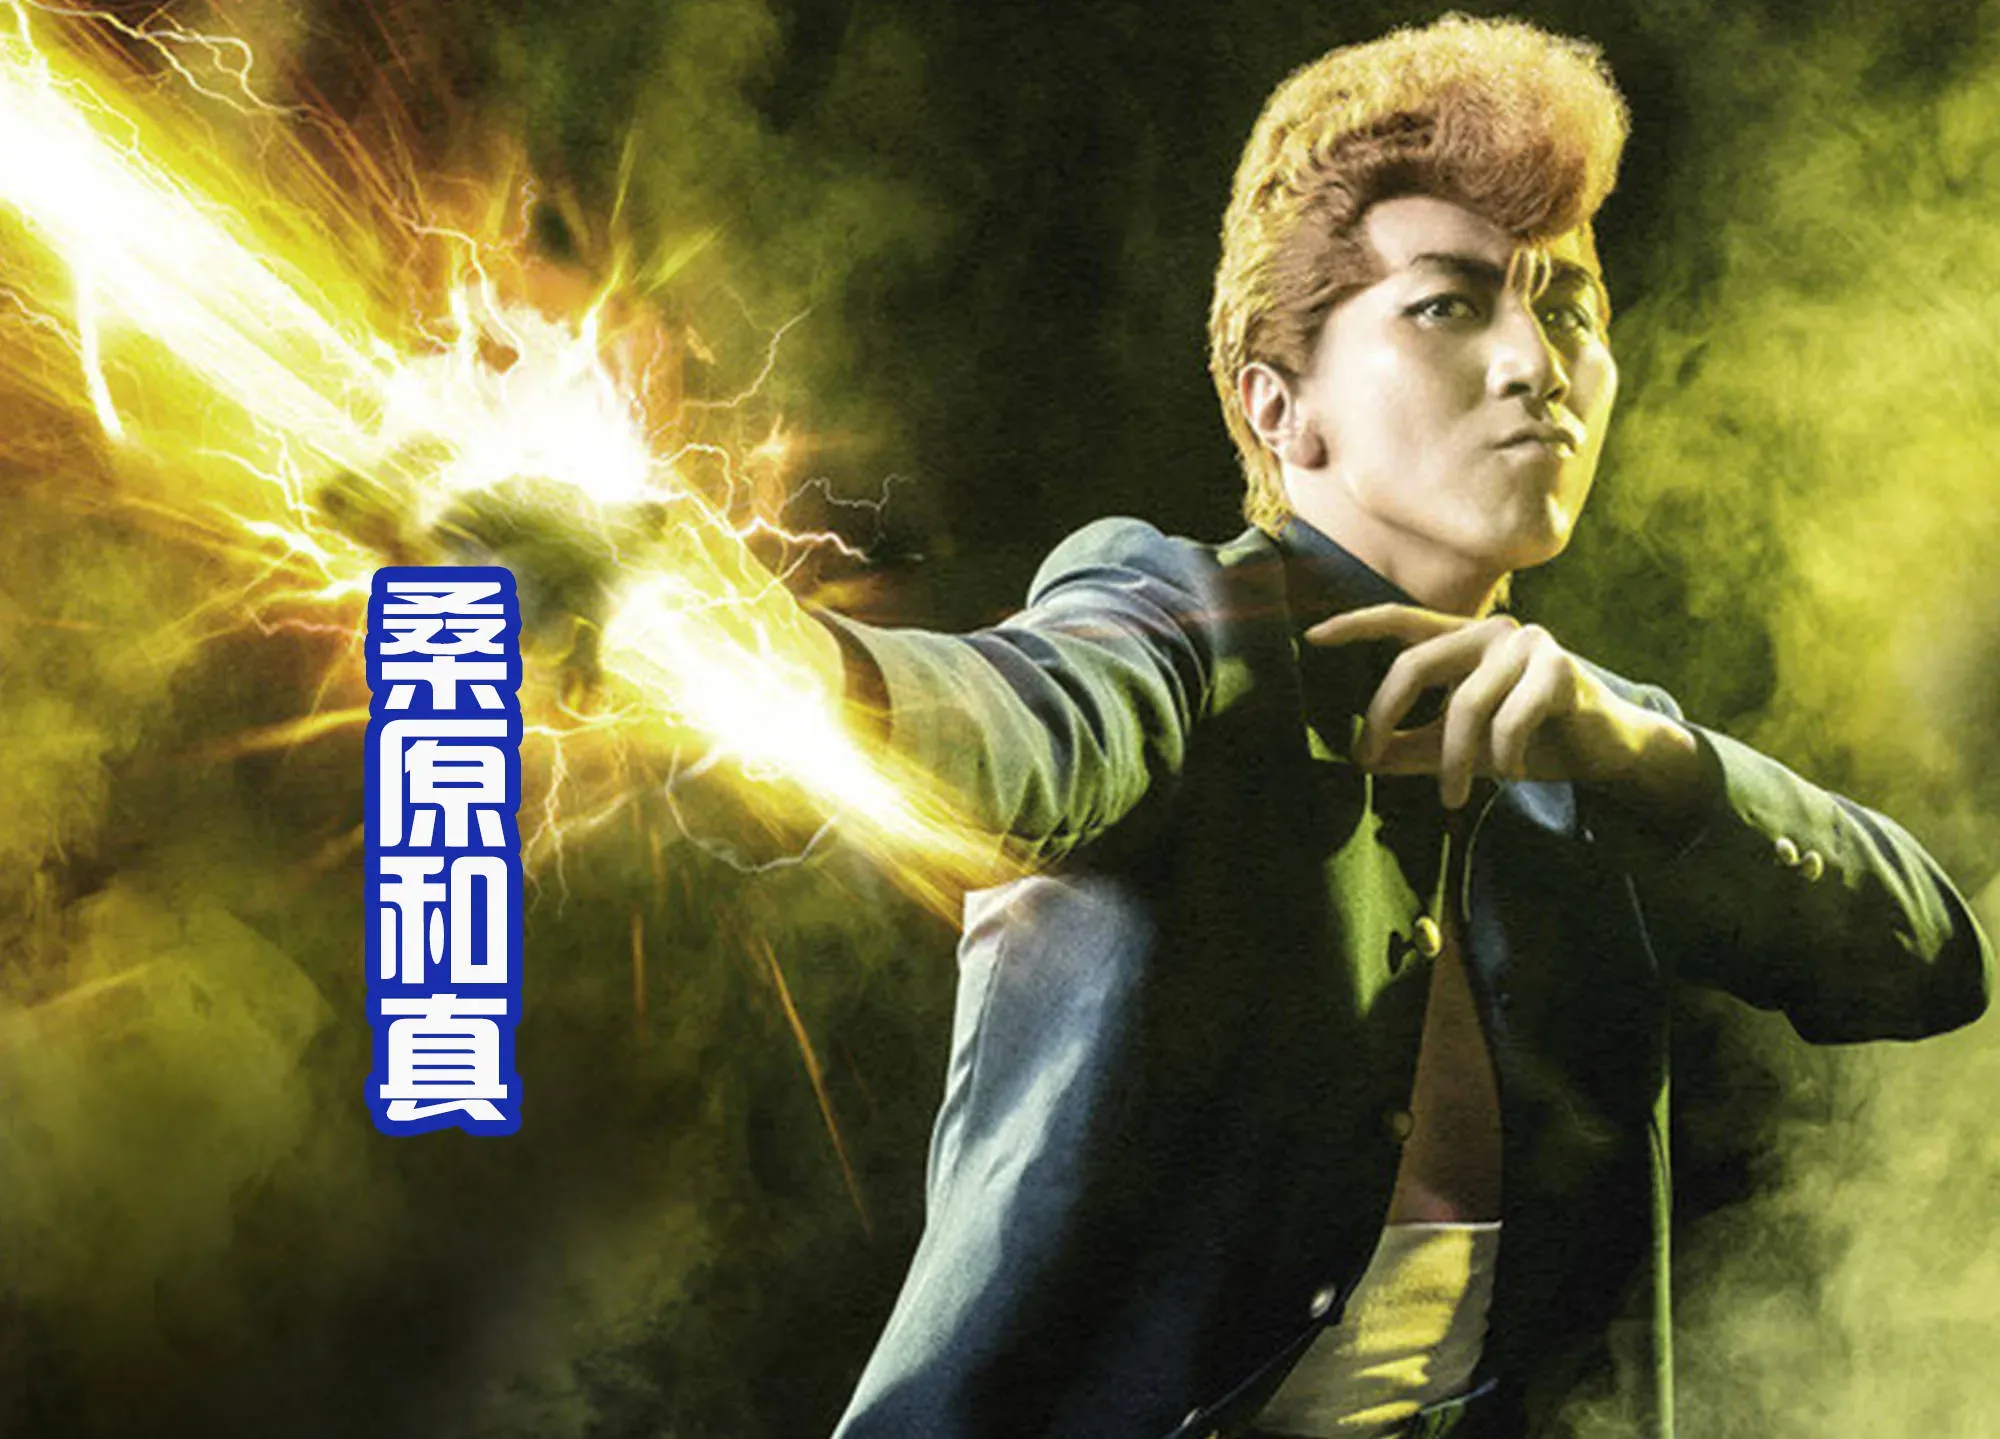 "Yu yu hakusho" Netflix's live-action drama will be broadcast in December next year! The protagonist poster announced! | FMV6